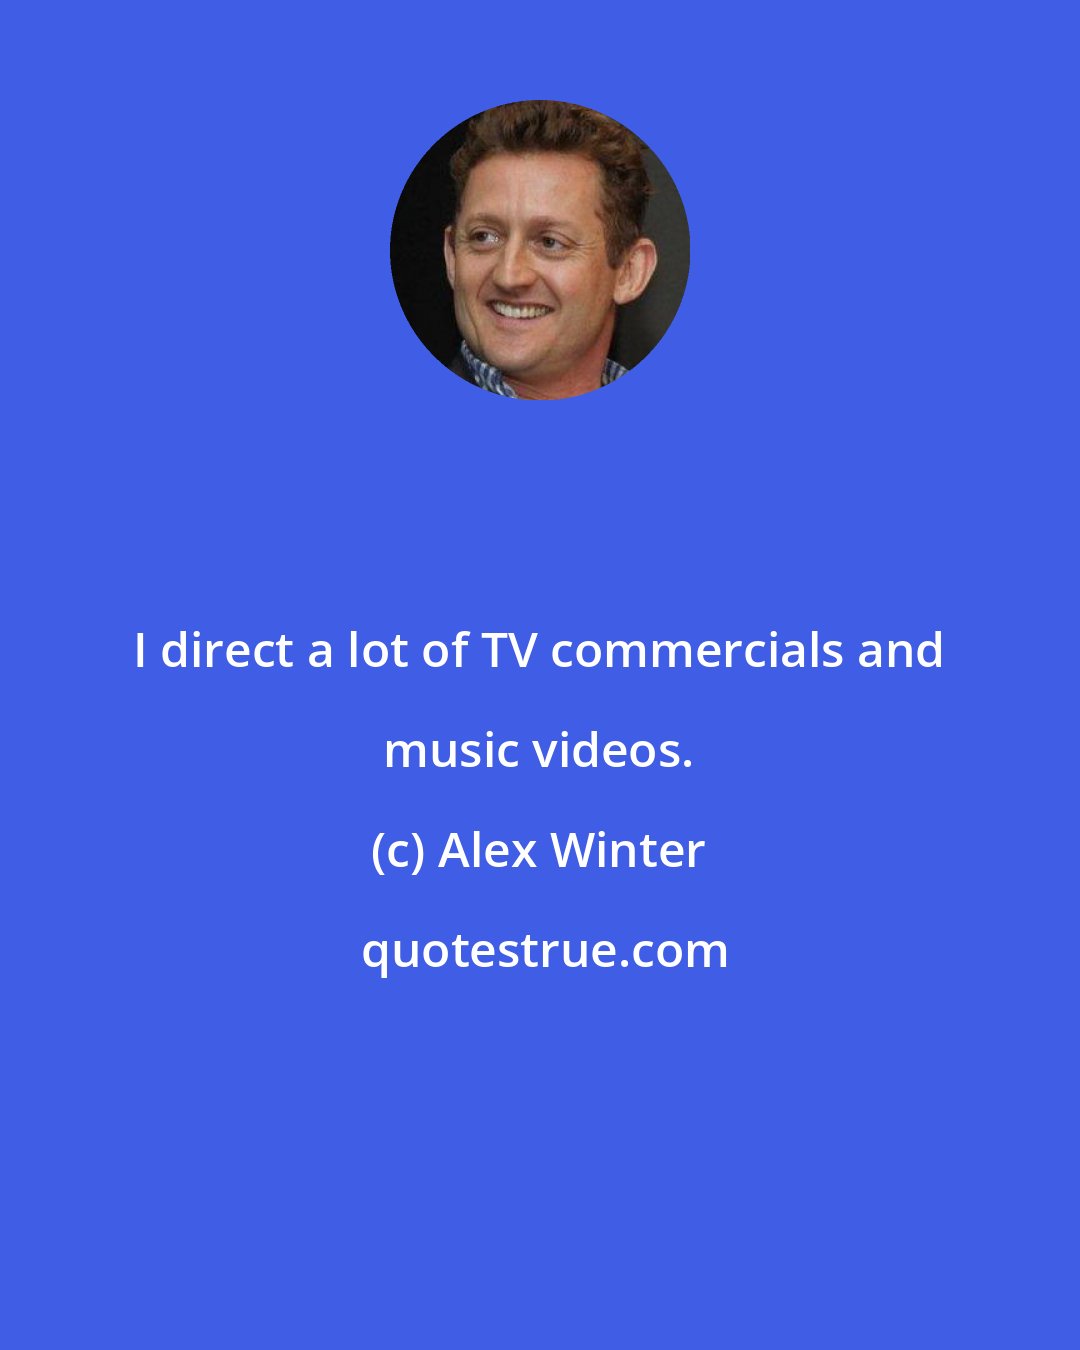 Alex Winter: I direct a lot of TV commercials and music videos.